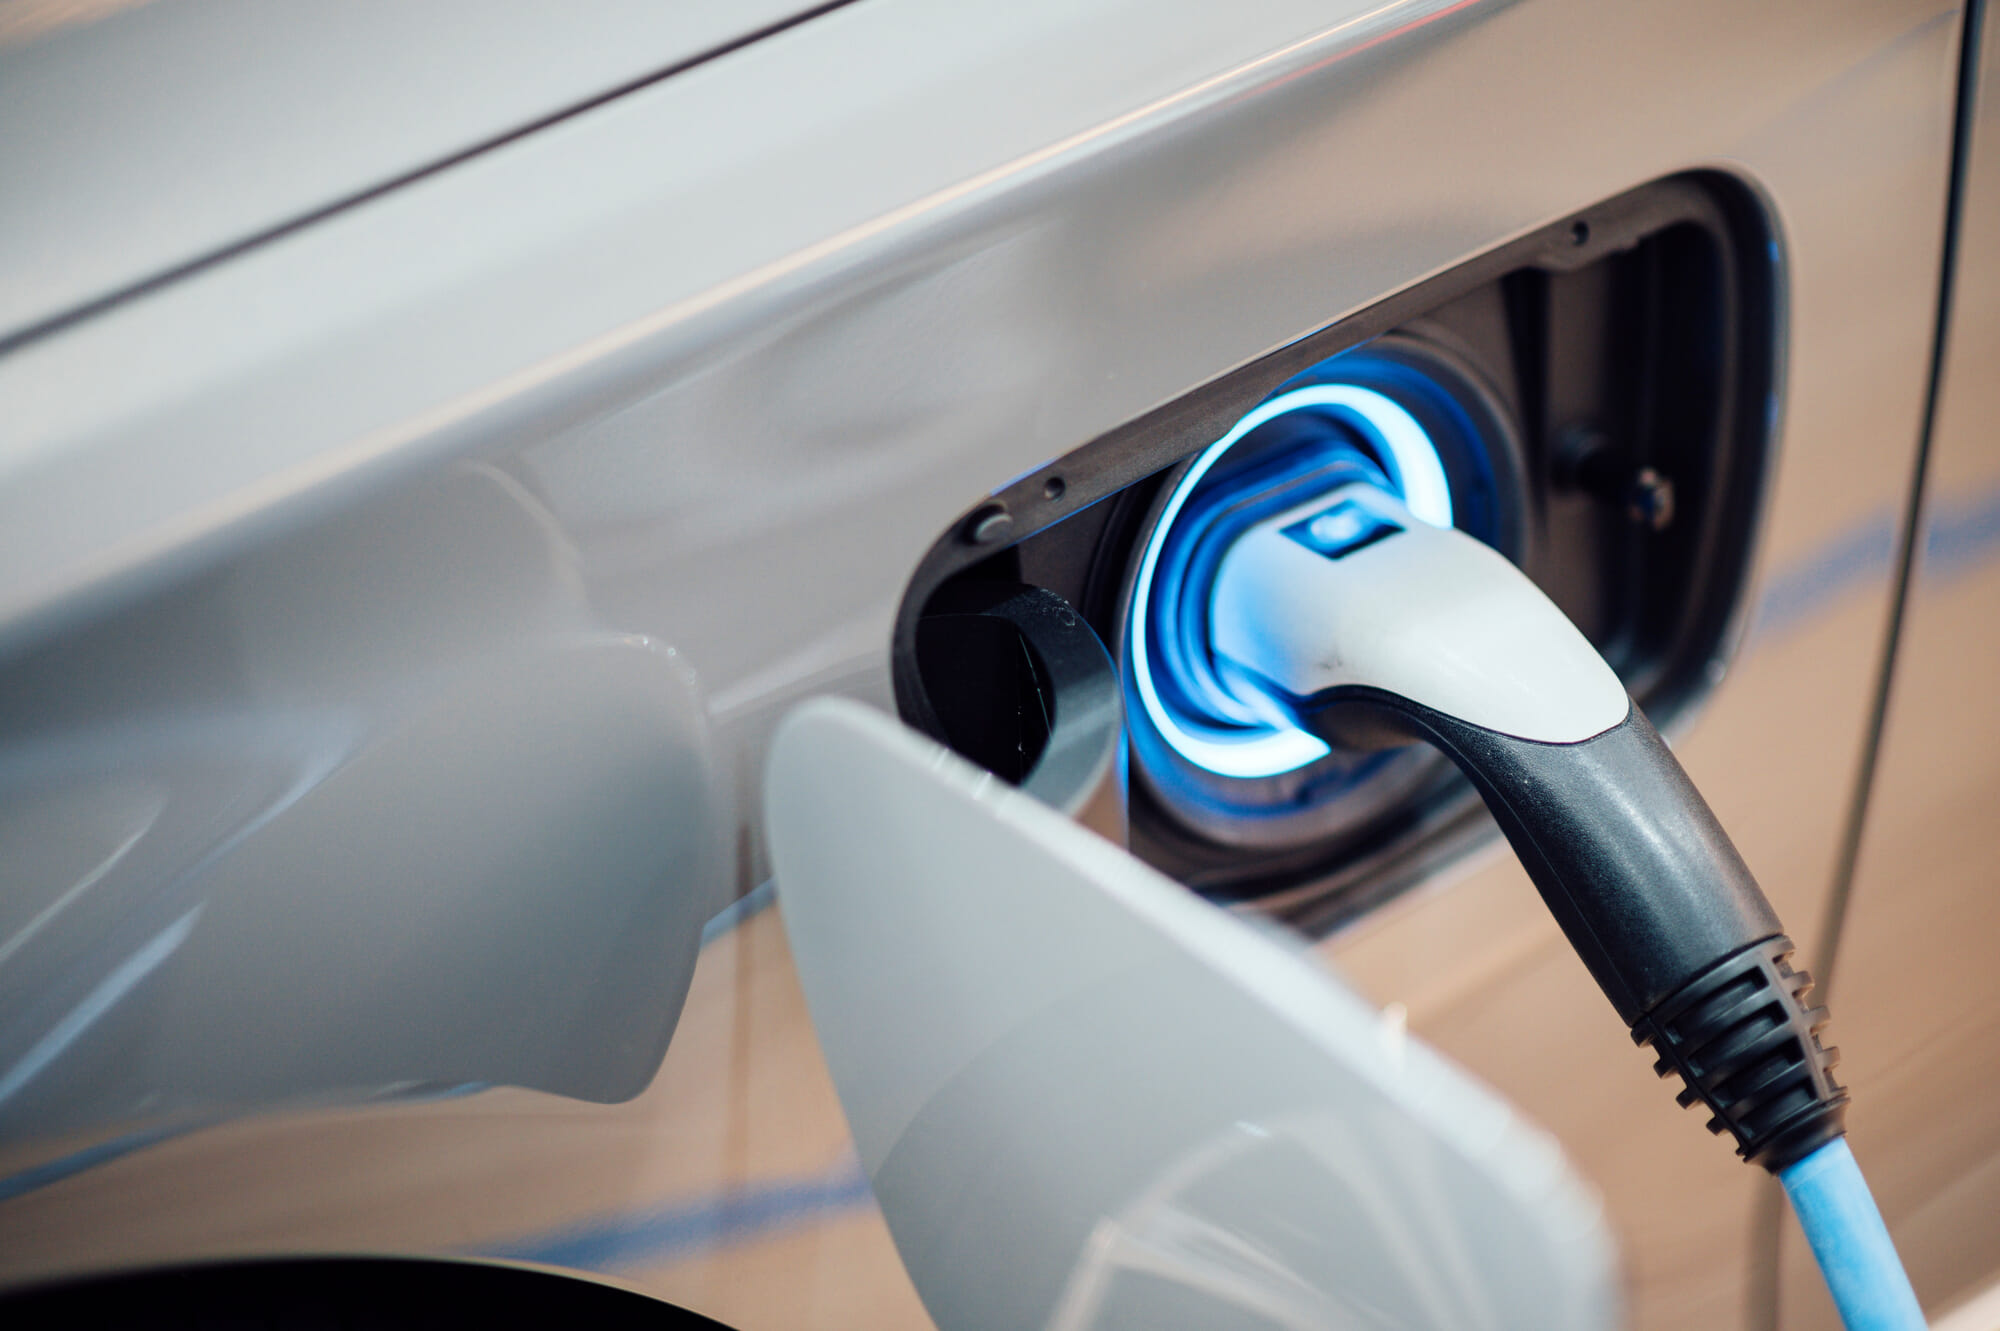 An electric charging station plug is connected to the charging port of a gray electric-powered car. The make and model of the car can't be determined from the photo.